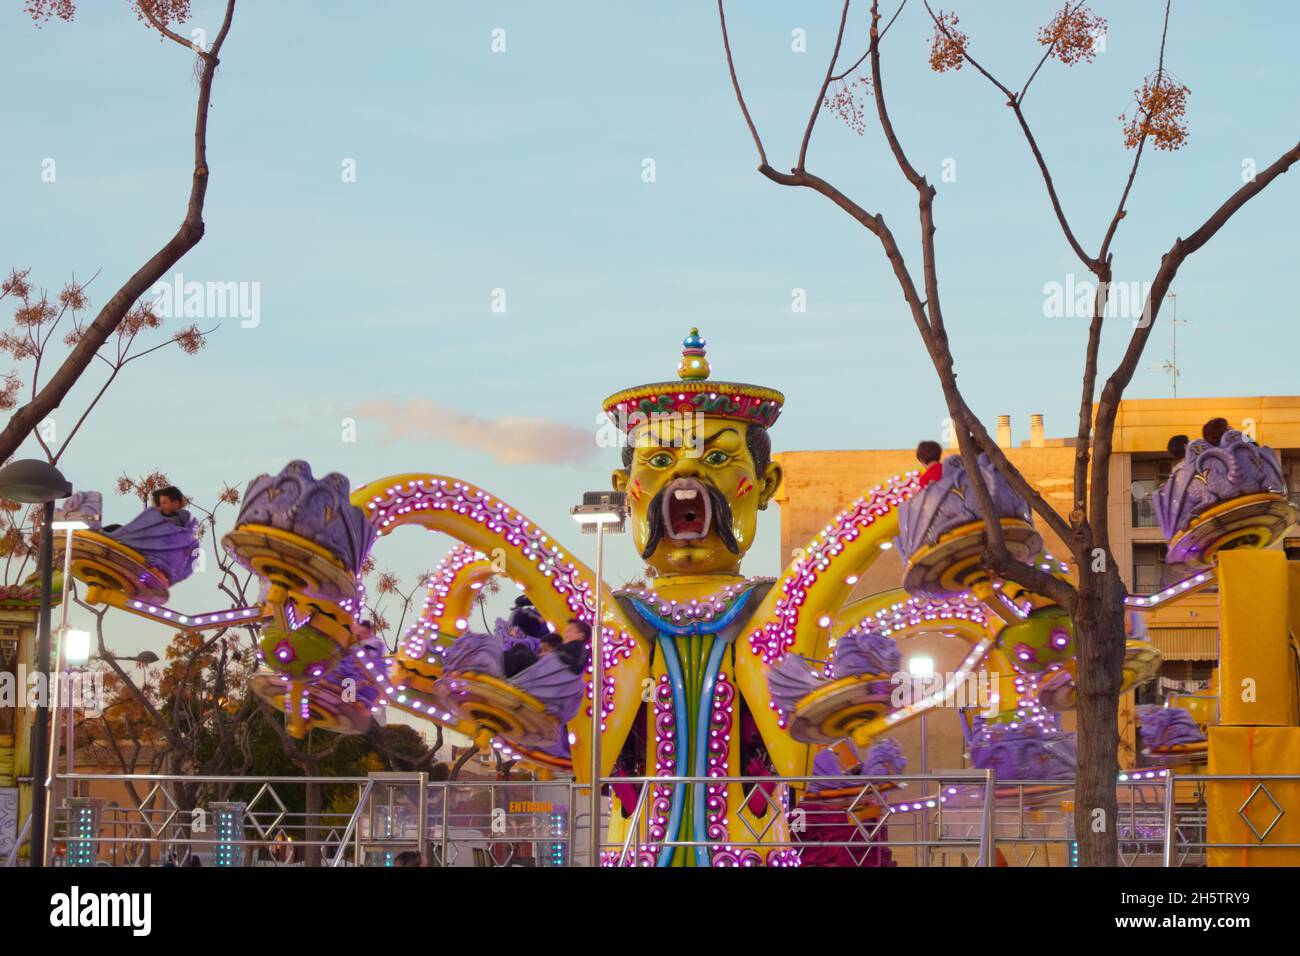 Ride carnival in valencia hires stock photography and images Alamy